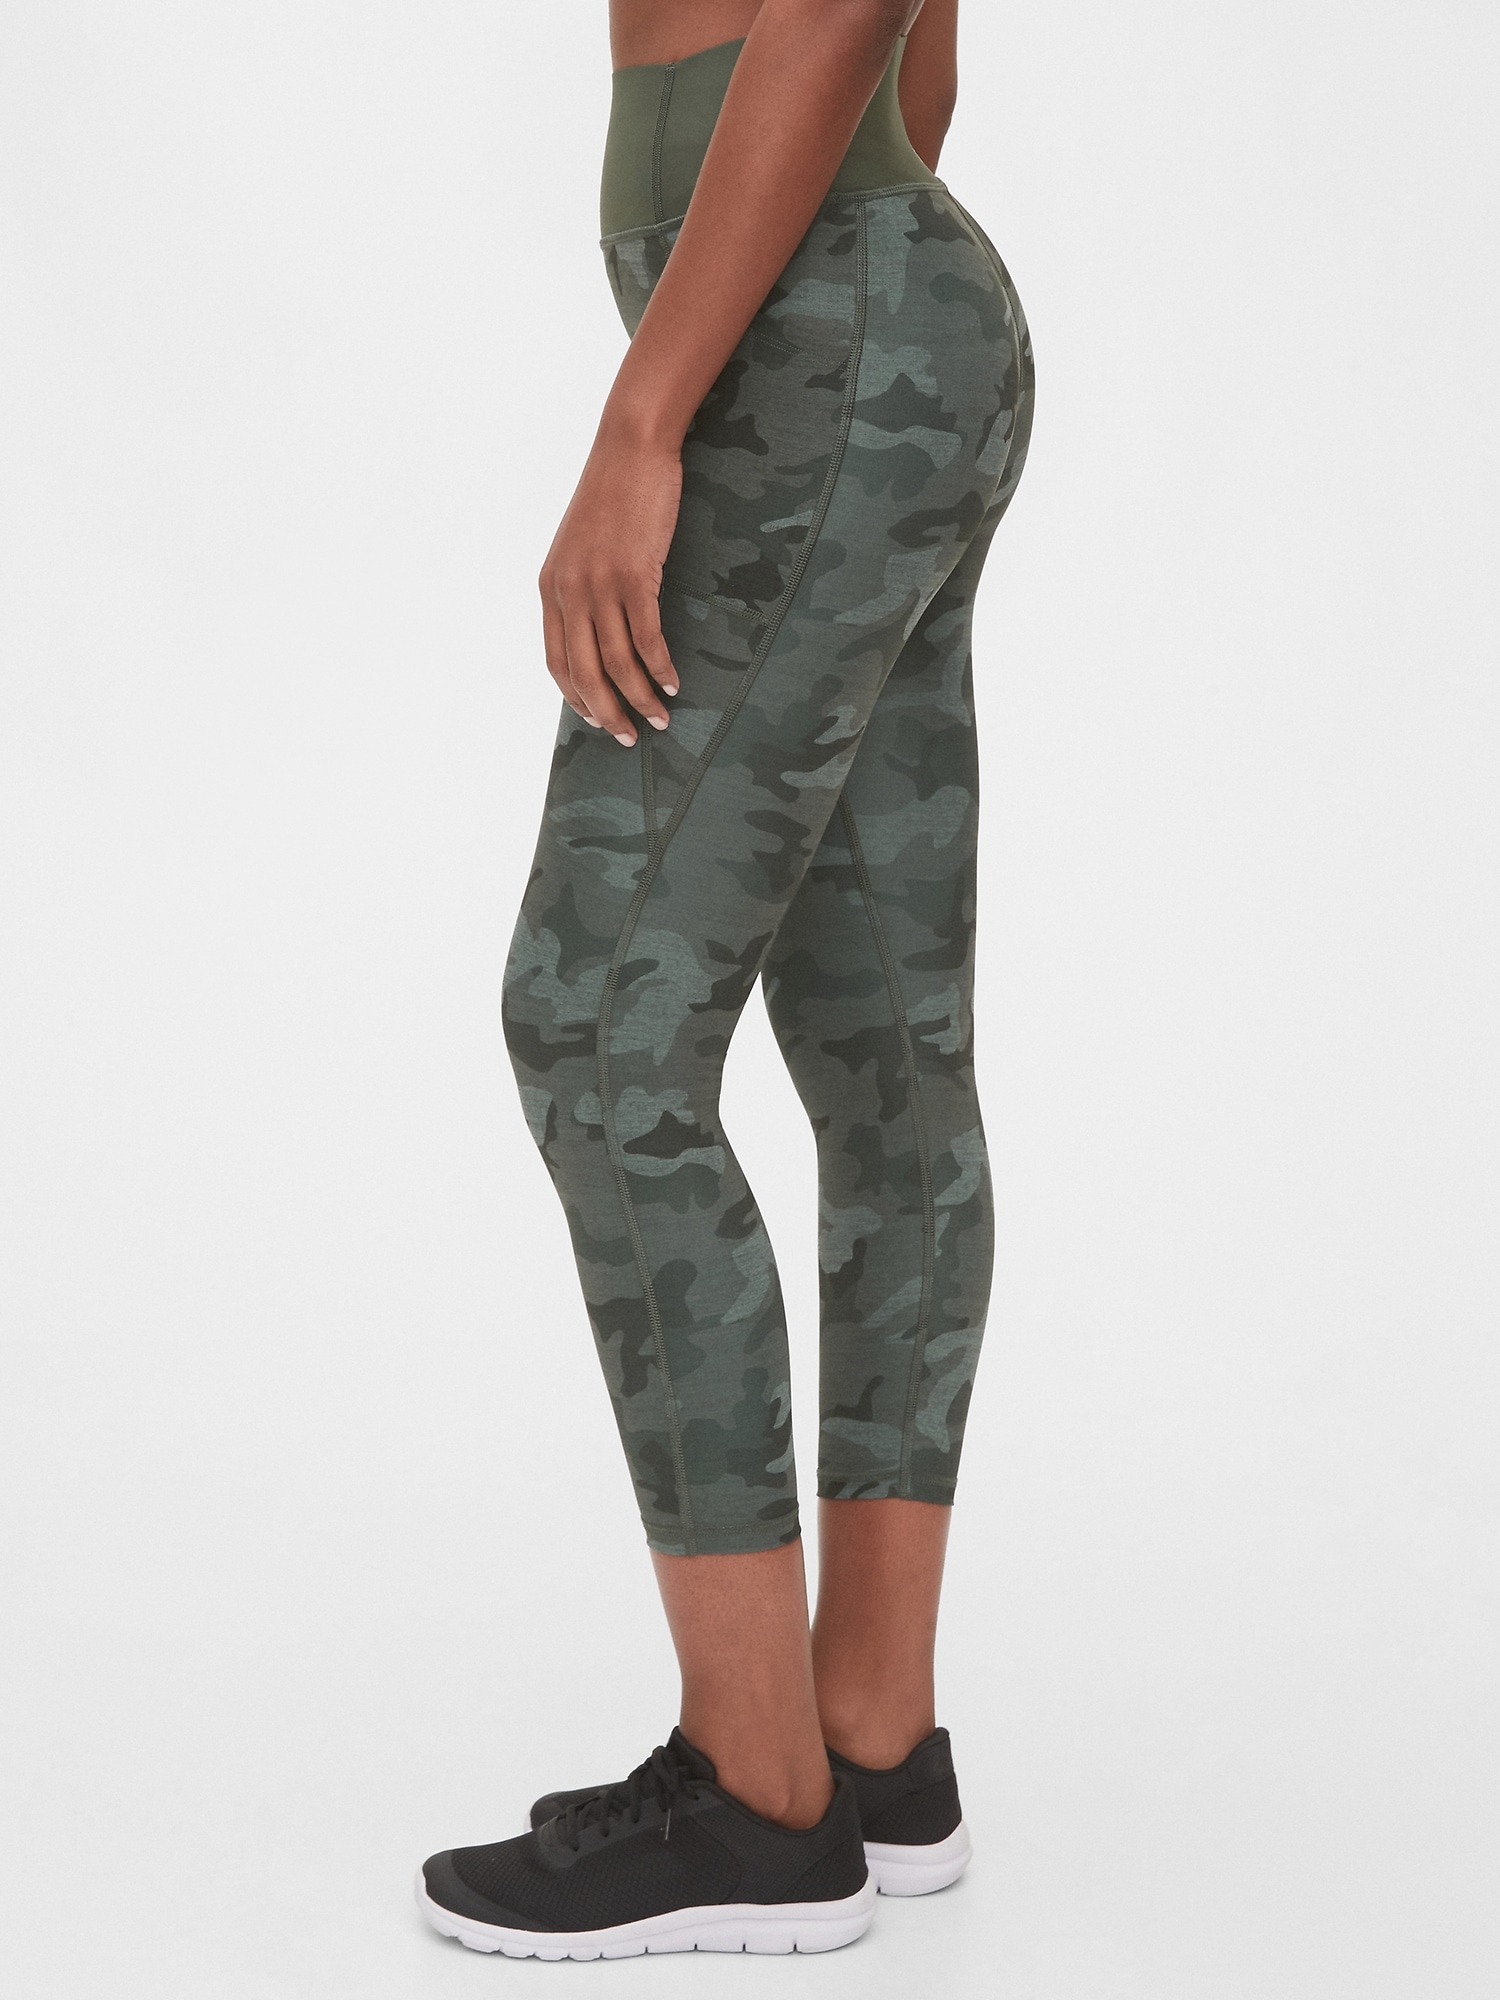 Green Camo Power Leggings with Pockets